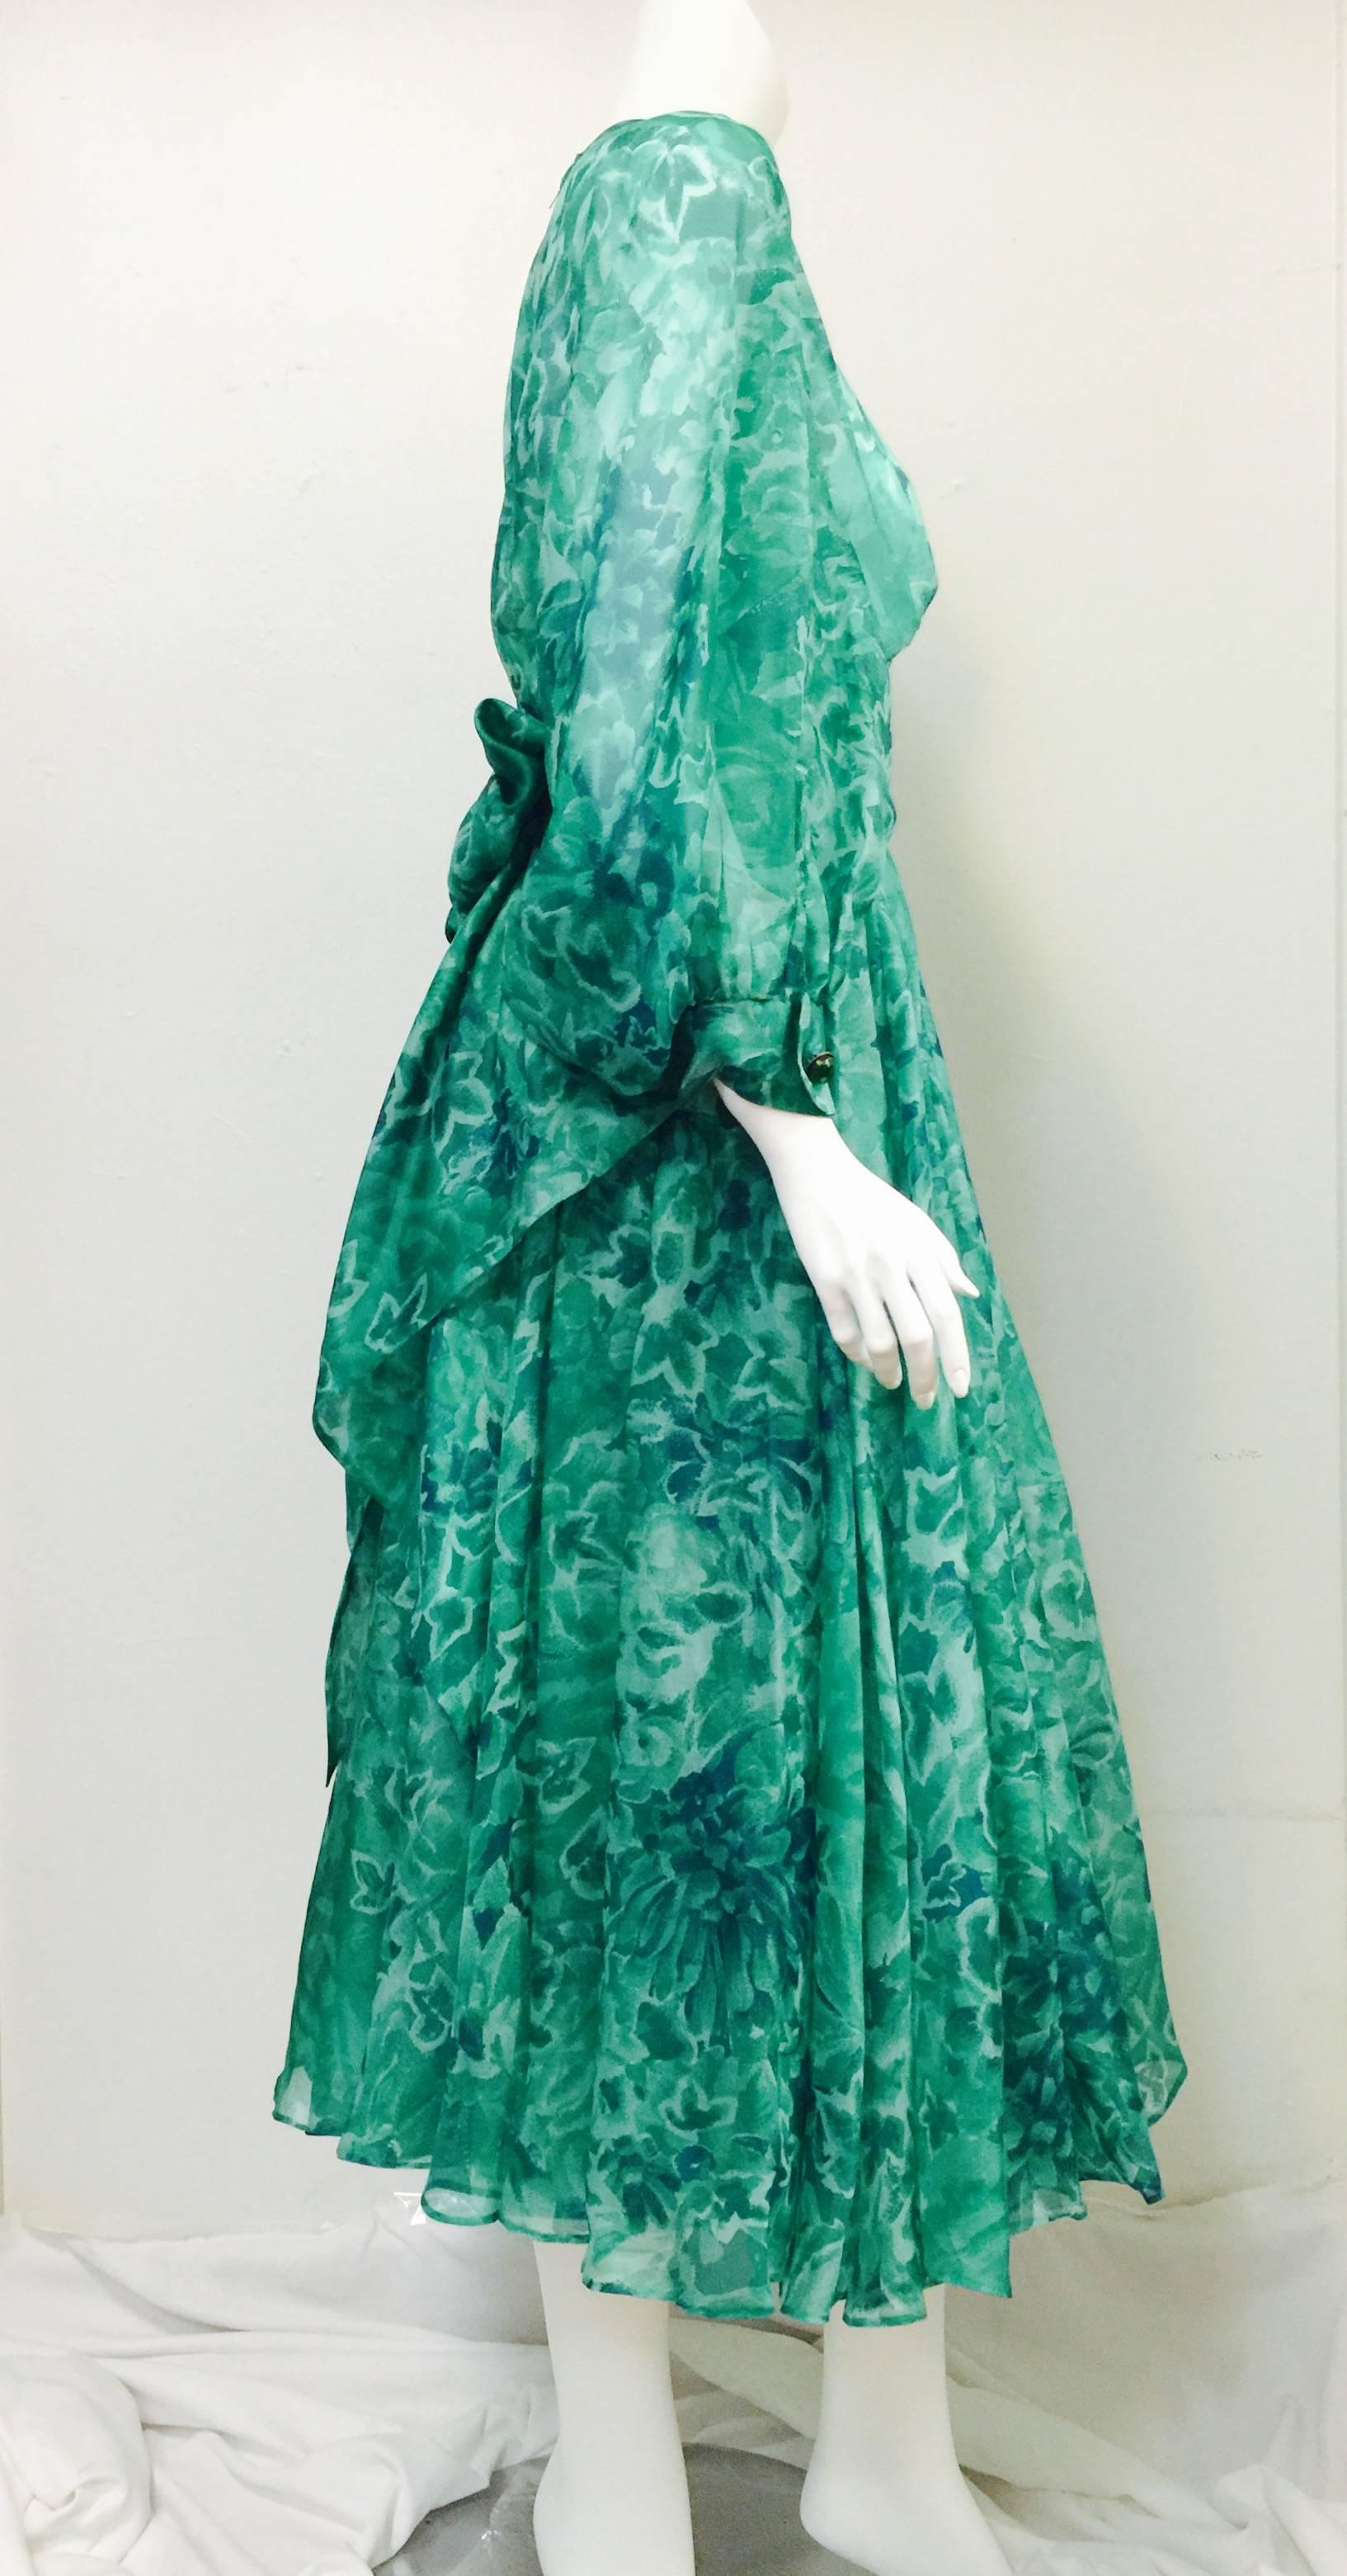 Custom Nina Ricci Day Dress is an ode to couture design and exalted craftsmanship!  Fit for Her Serene Highness, Princess Grace of Monaco, dress features yards and yards of ultra-luxurious green floral silk. Feminine pintucks, fitted bateau